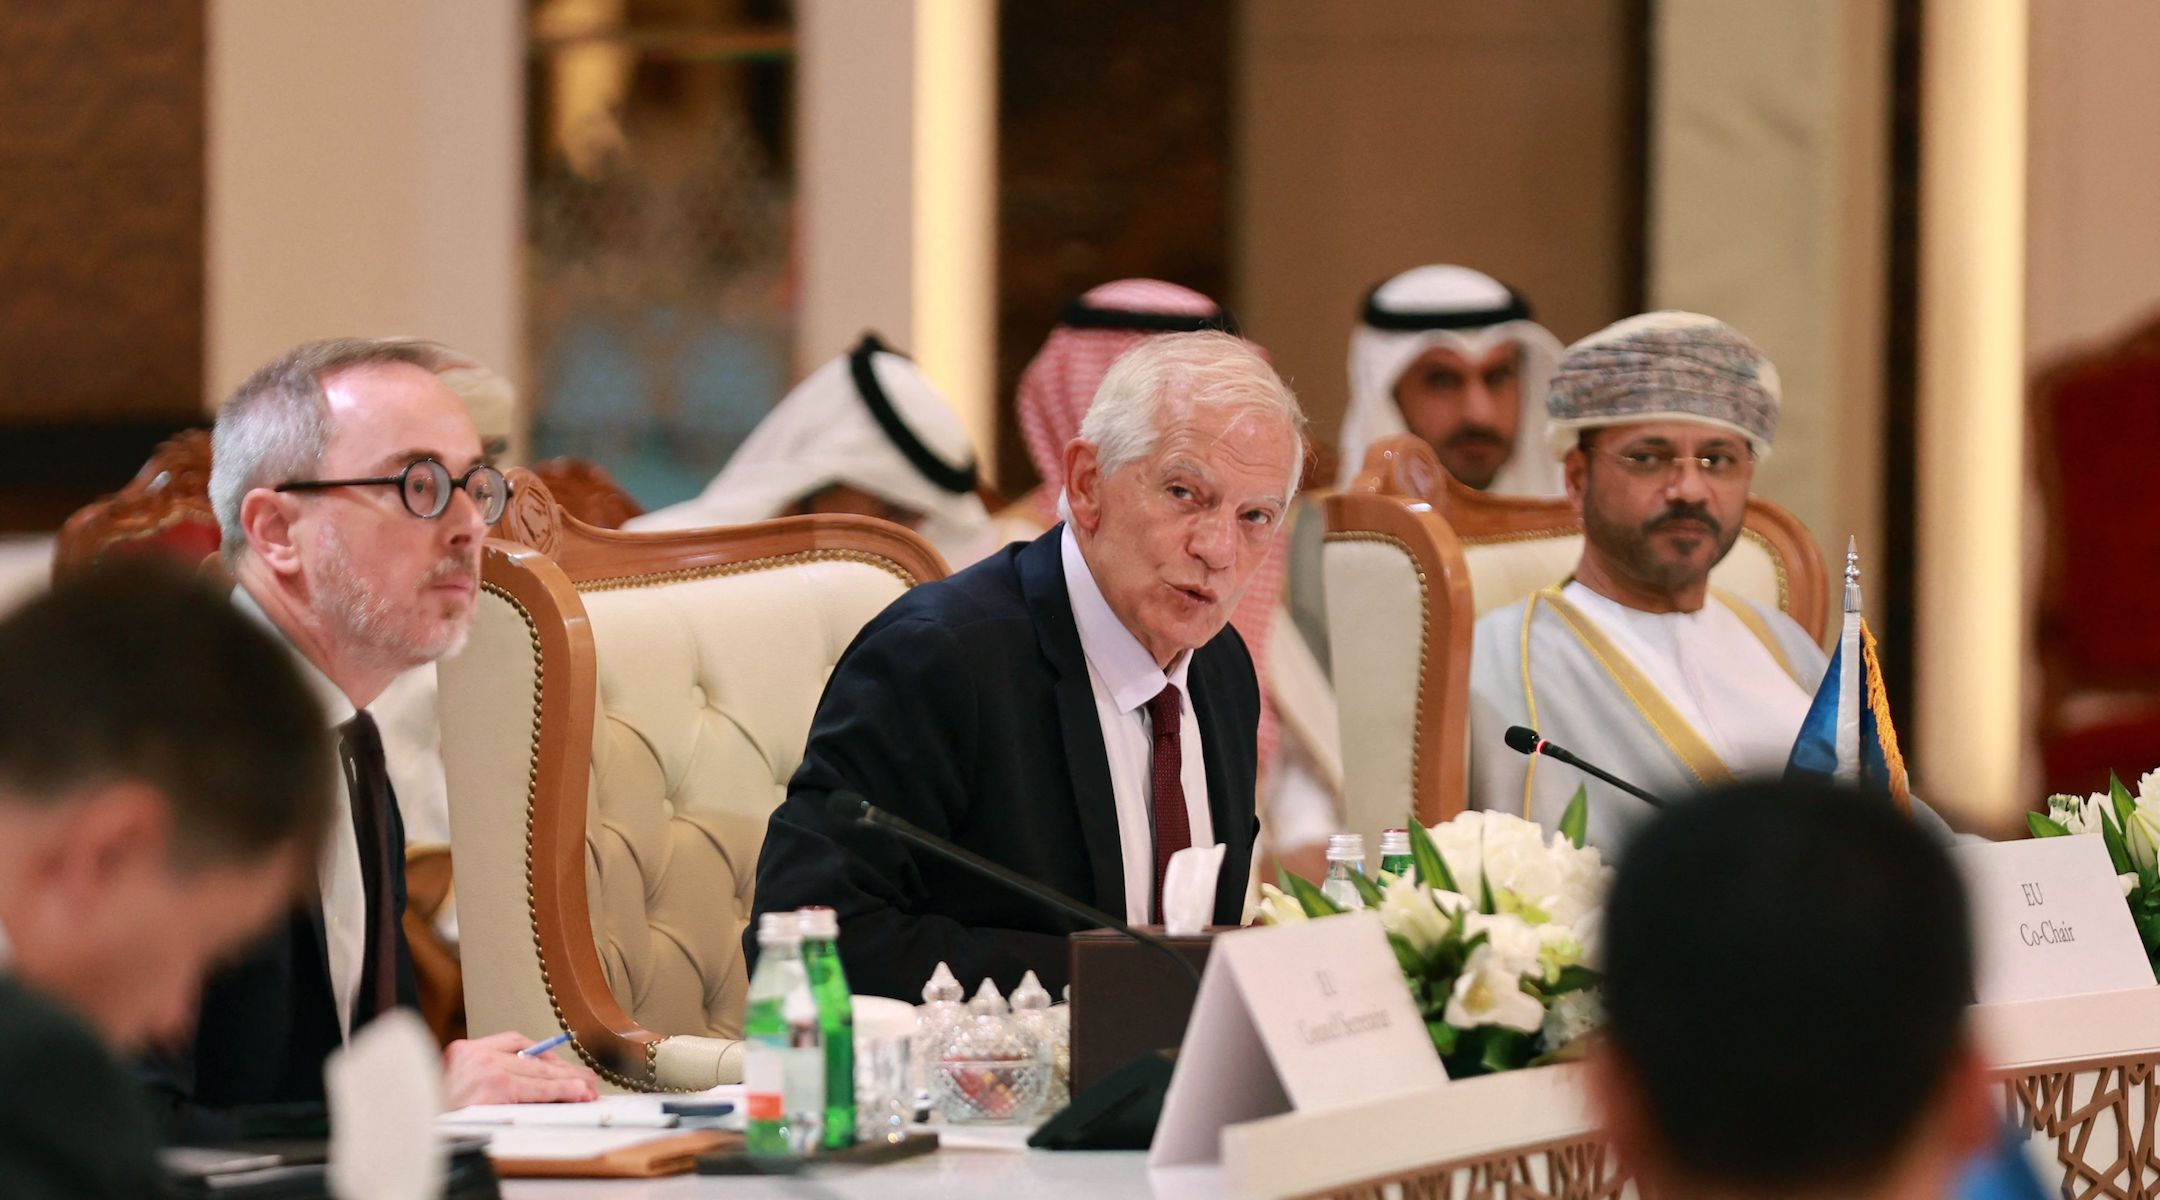 EU High Representative for Foreign Affairs and Security Policy Josep Borrell addresses the Joint Gulf Cooperation Council in Muscat, Oman, Oct. 10, 2023. (AFP via Getty Images)